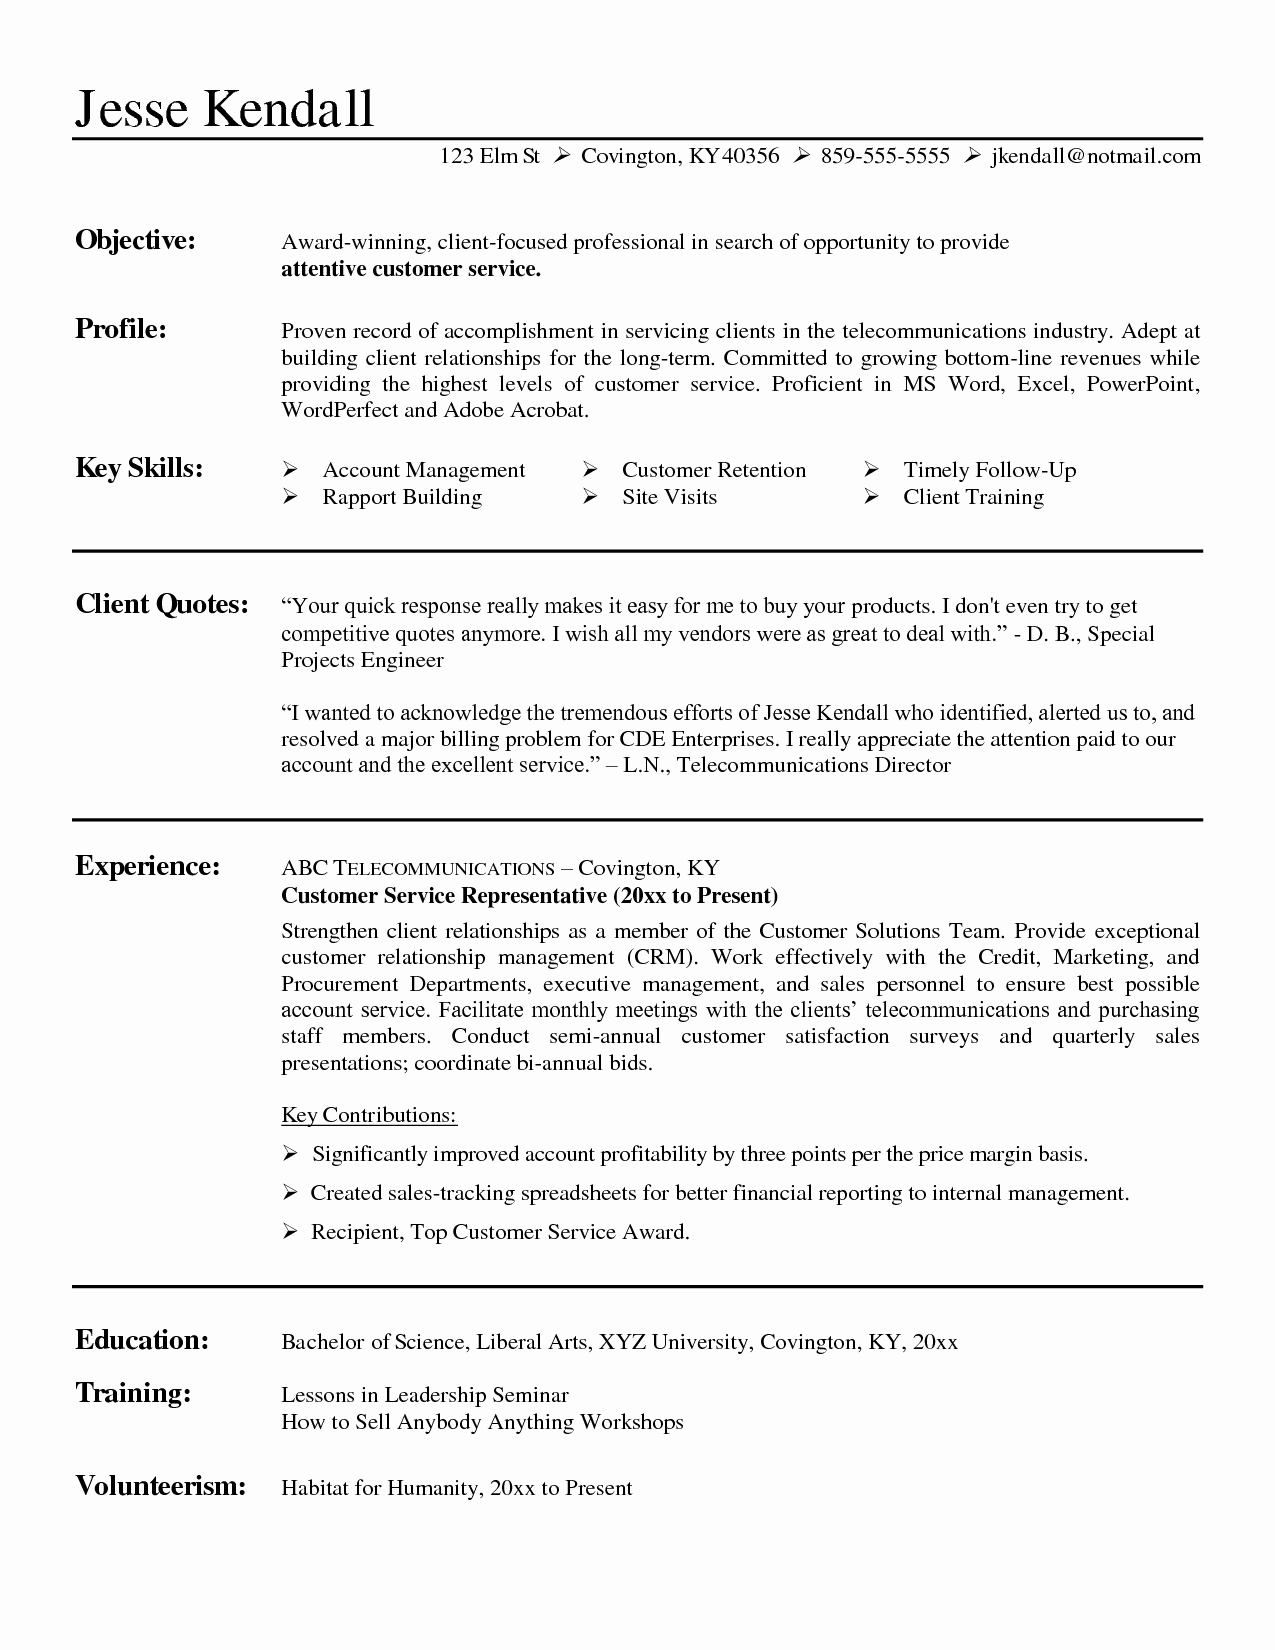 Going Paperless Letter to Customers Template - Sample Administrative assistant Resume Elegant 29 Best Resume